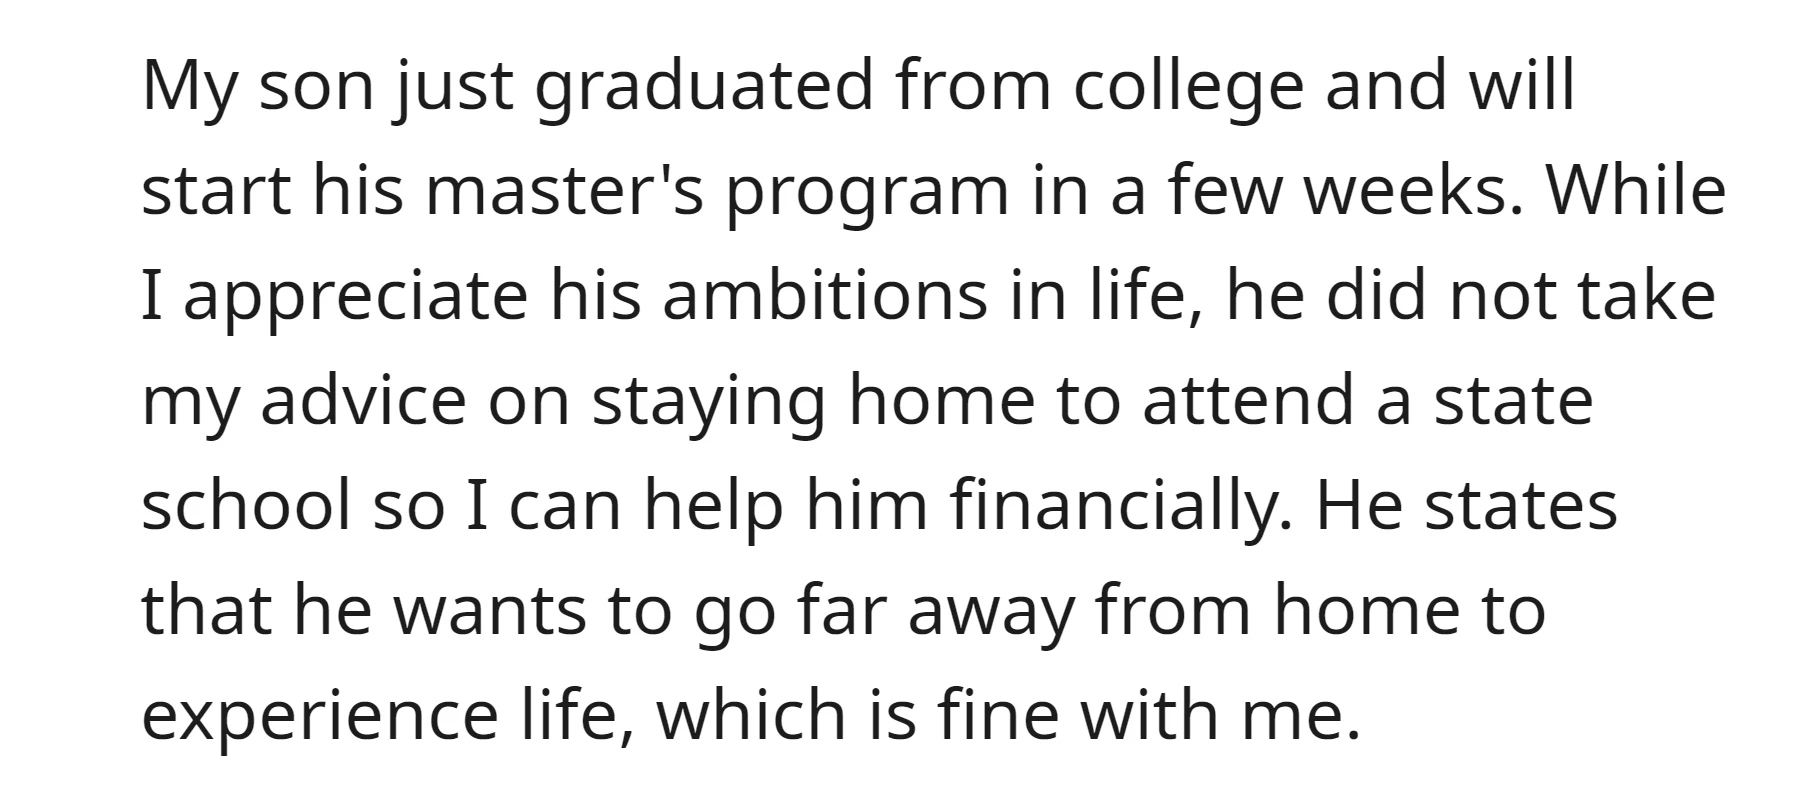 OP's son chose to pursue a master's program far from home to experience life independently